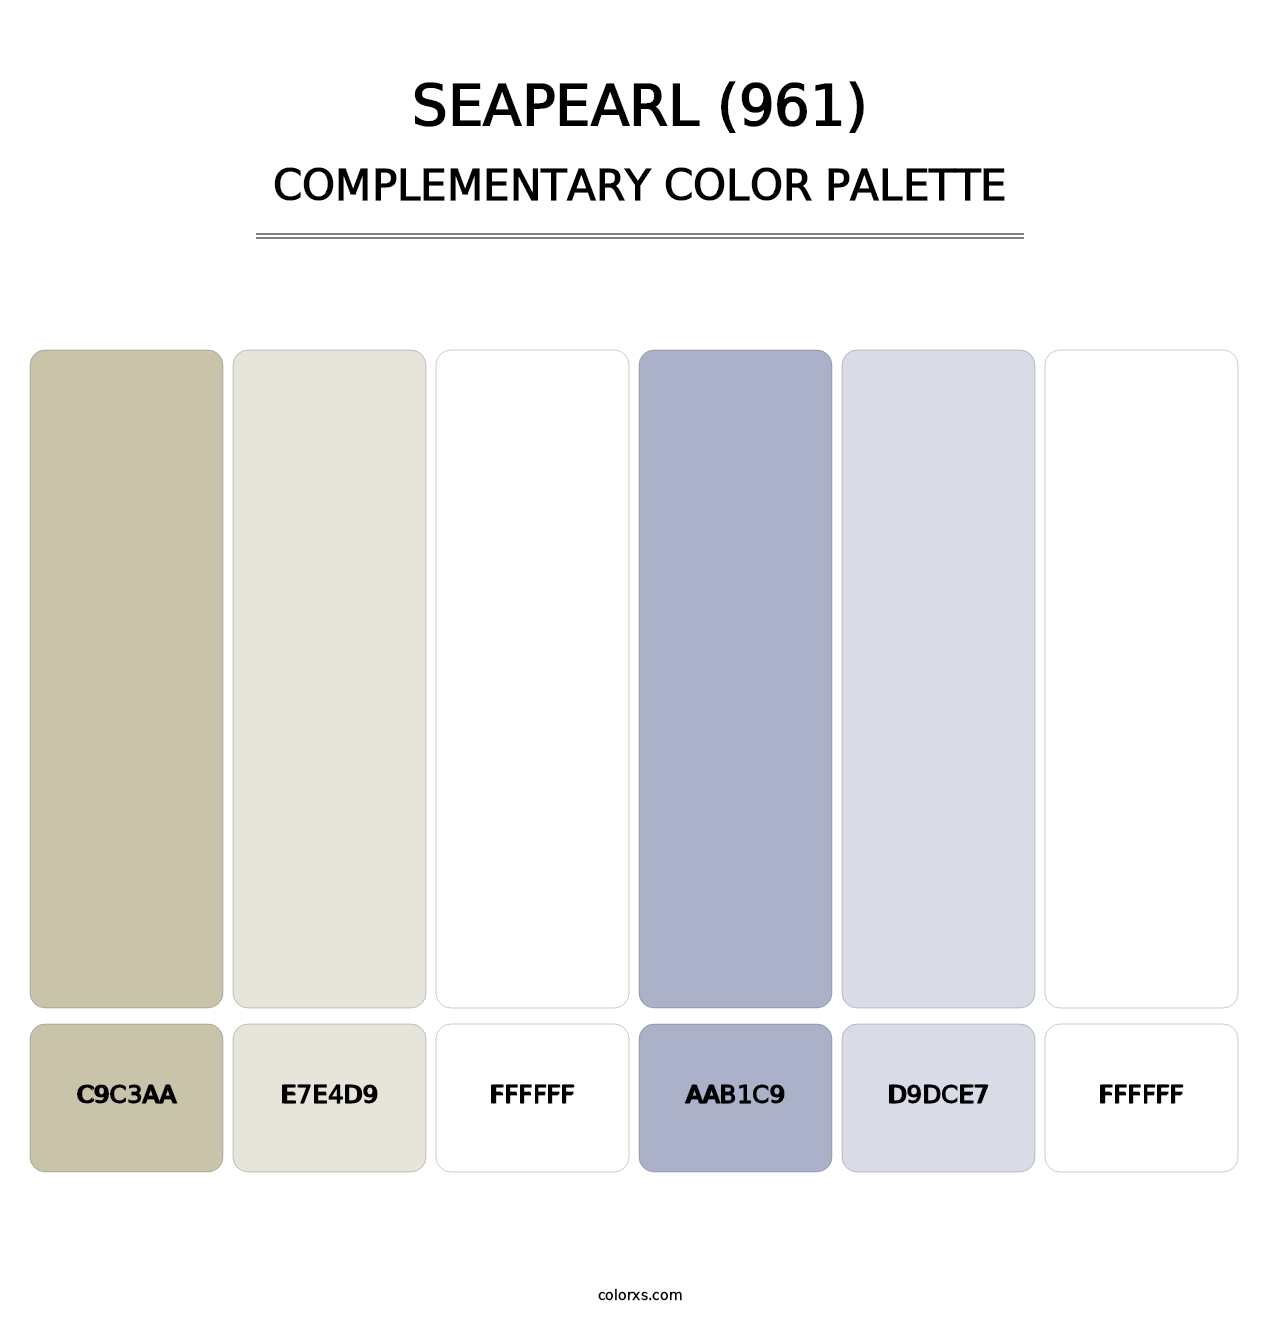 Seapearl (961) - Complementary Color Palette